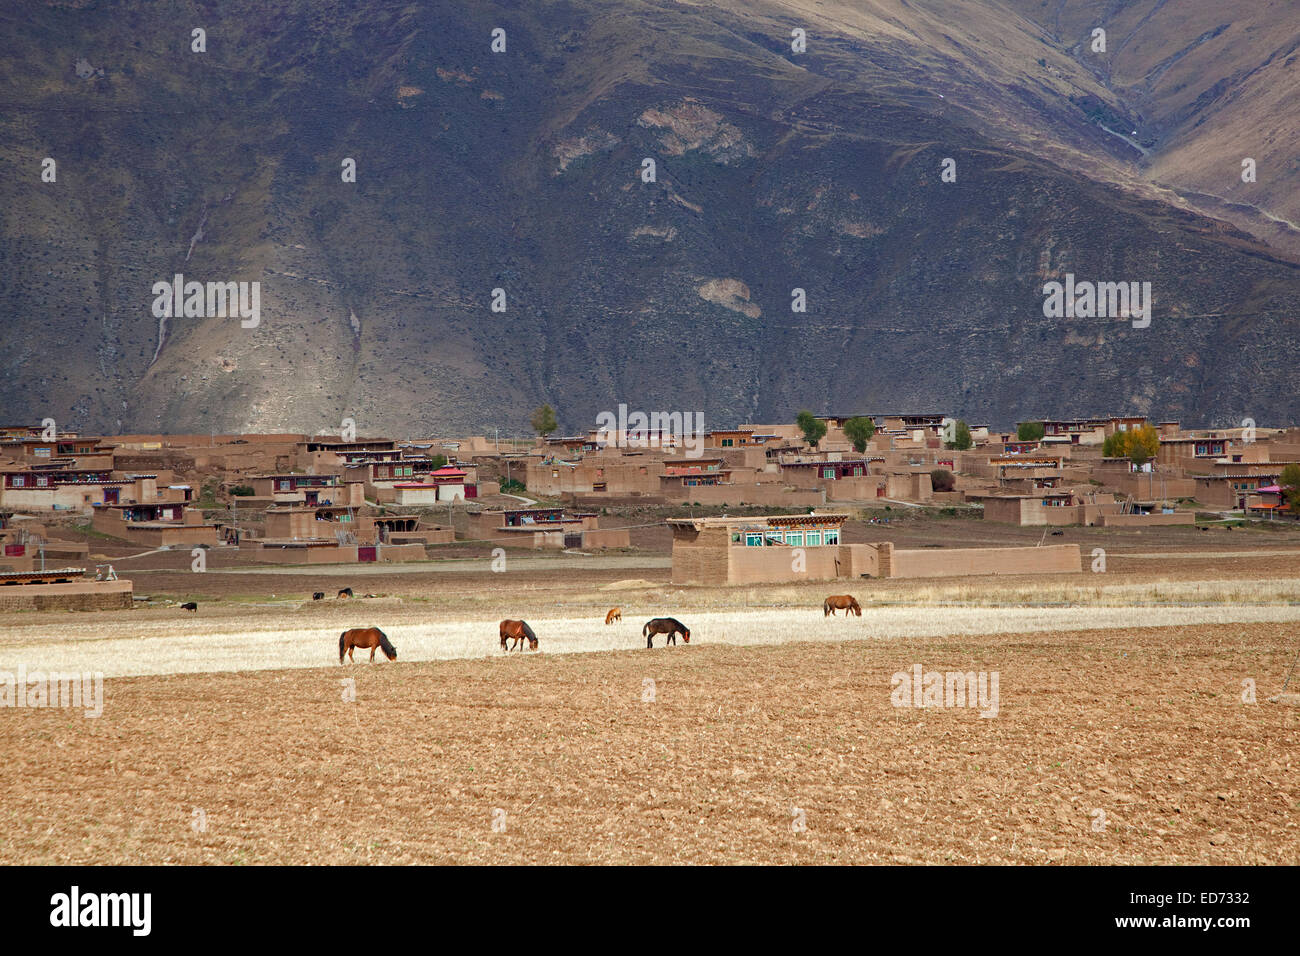 Rural village with horses between Zhuqing and Ganzi in the Himalayas along the Sichuan-Tibet Highway, Sichuan Province, China Stock Photo